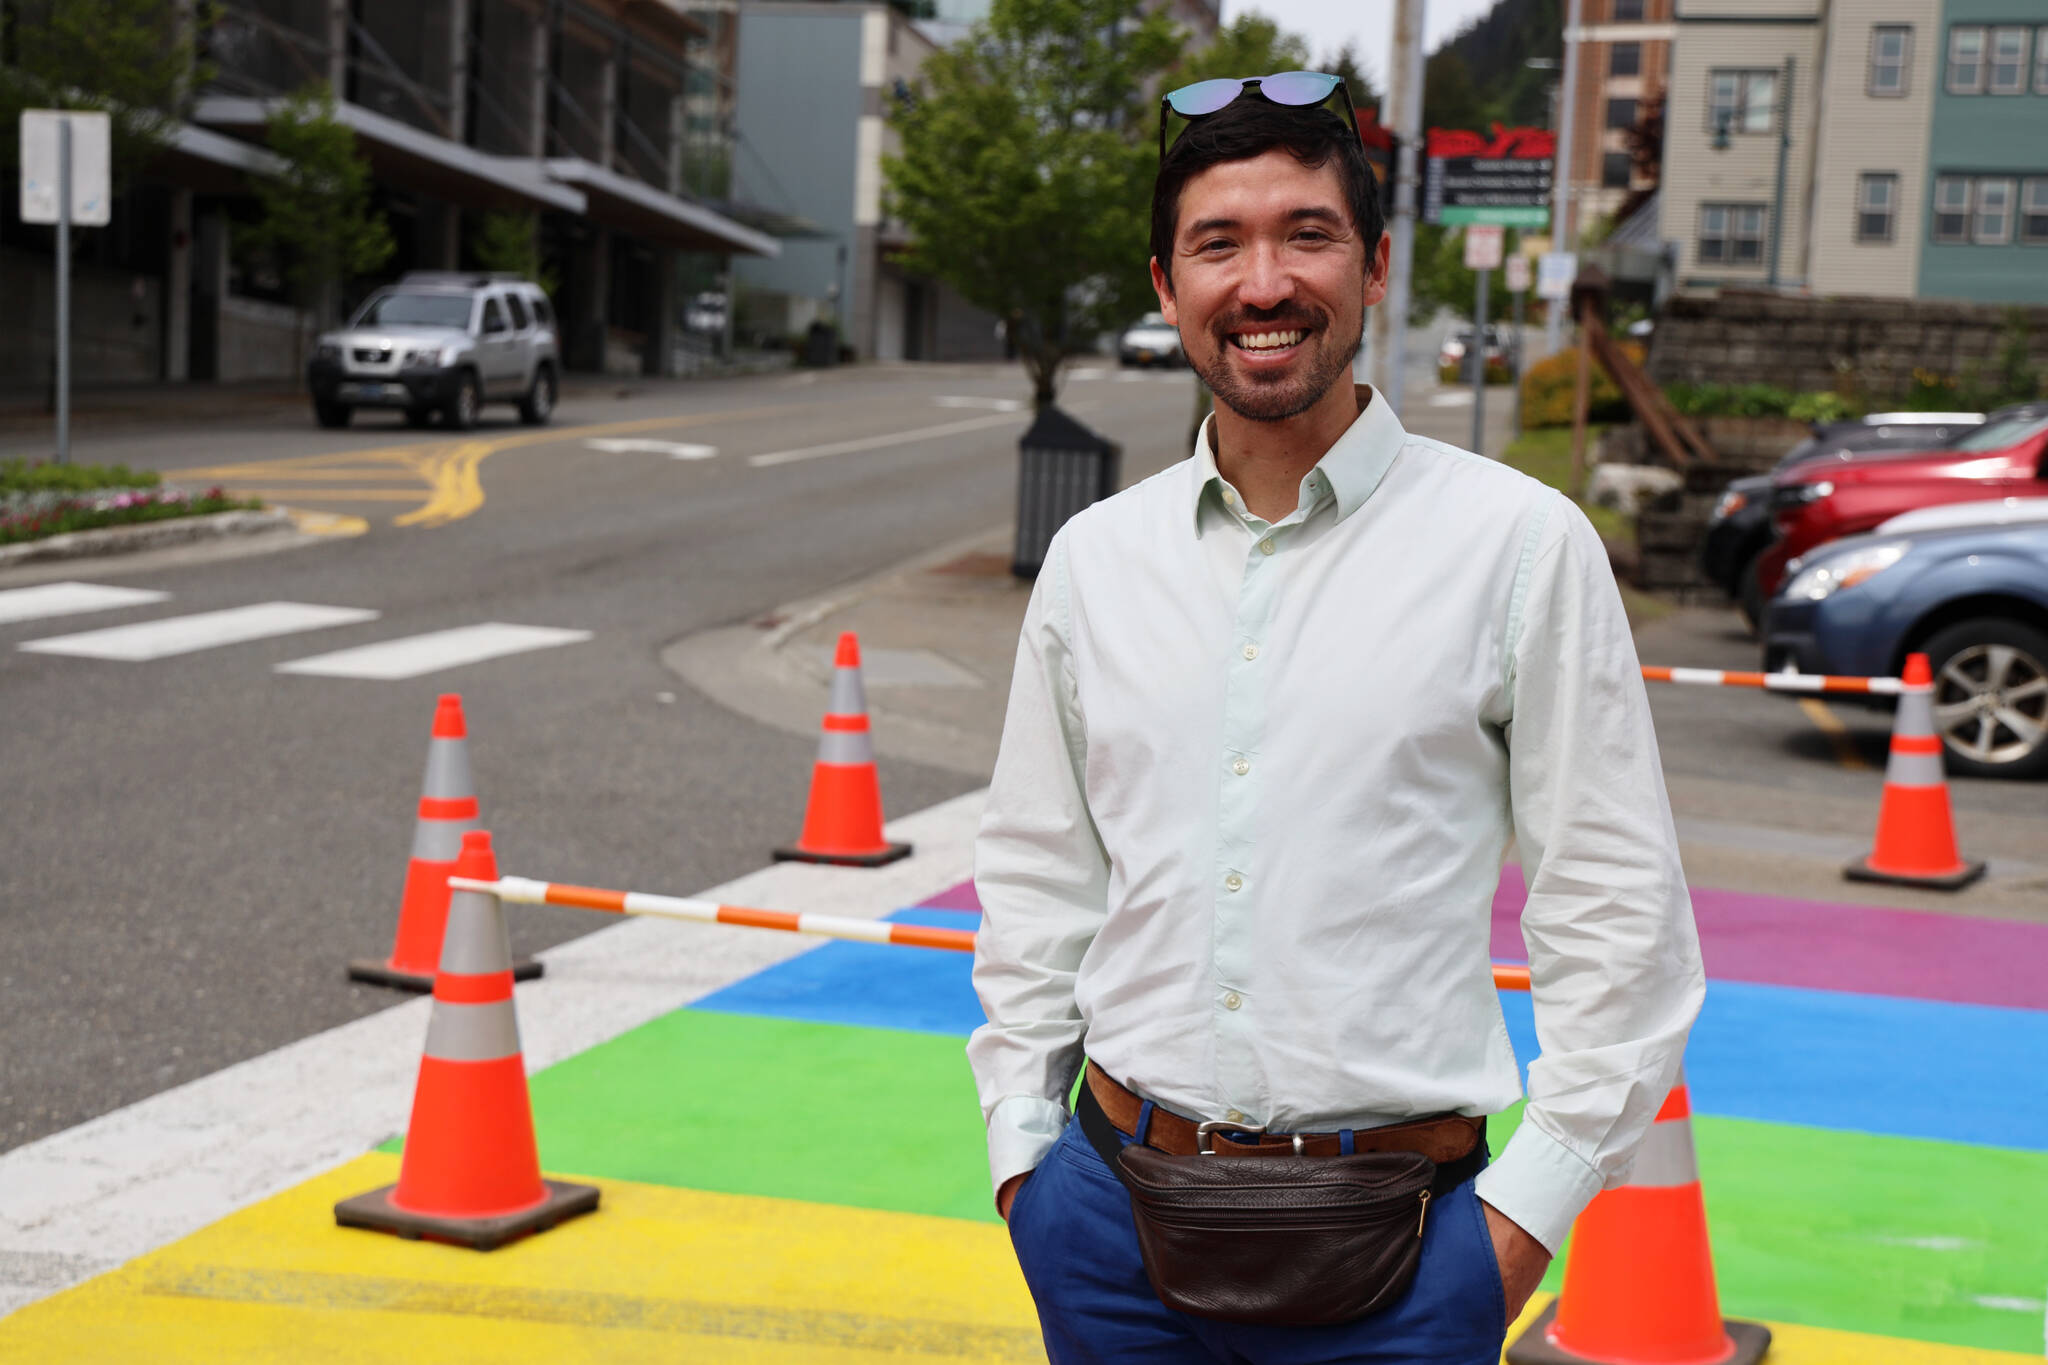 City and Borough of Juneau Assembly member Greg Smith smiles Thursday afternoon while walking across the rainbow crosswalk recently repainted in downtown Juneau. (Clarise Larson / Juneau Empire)